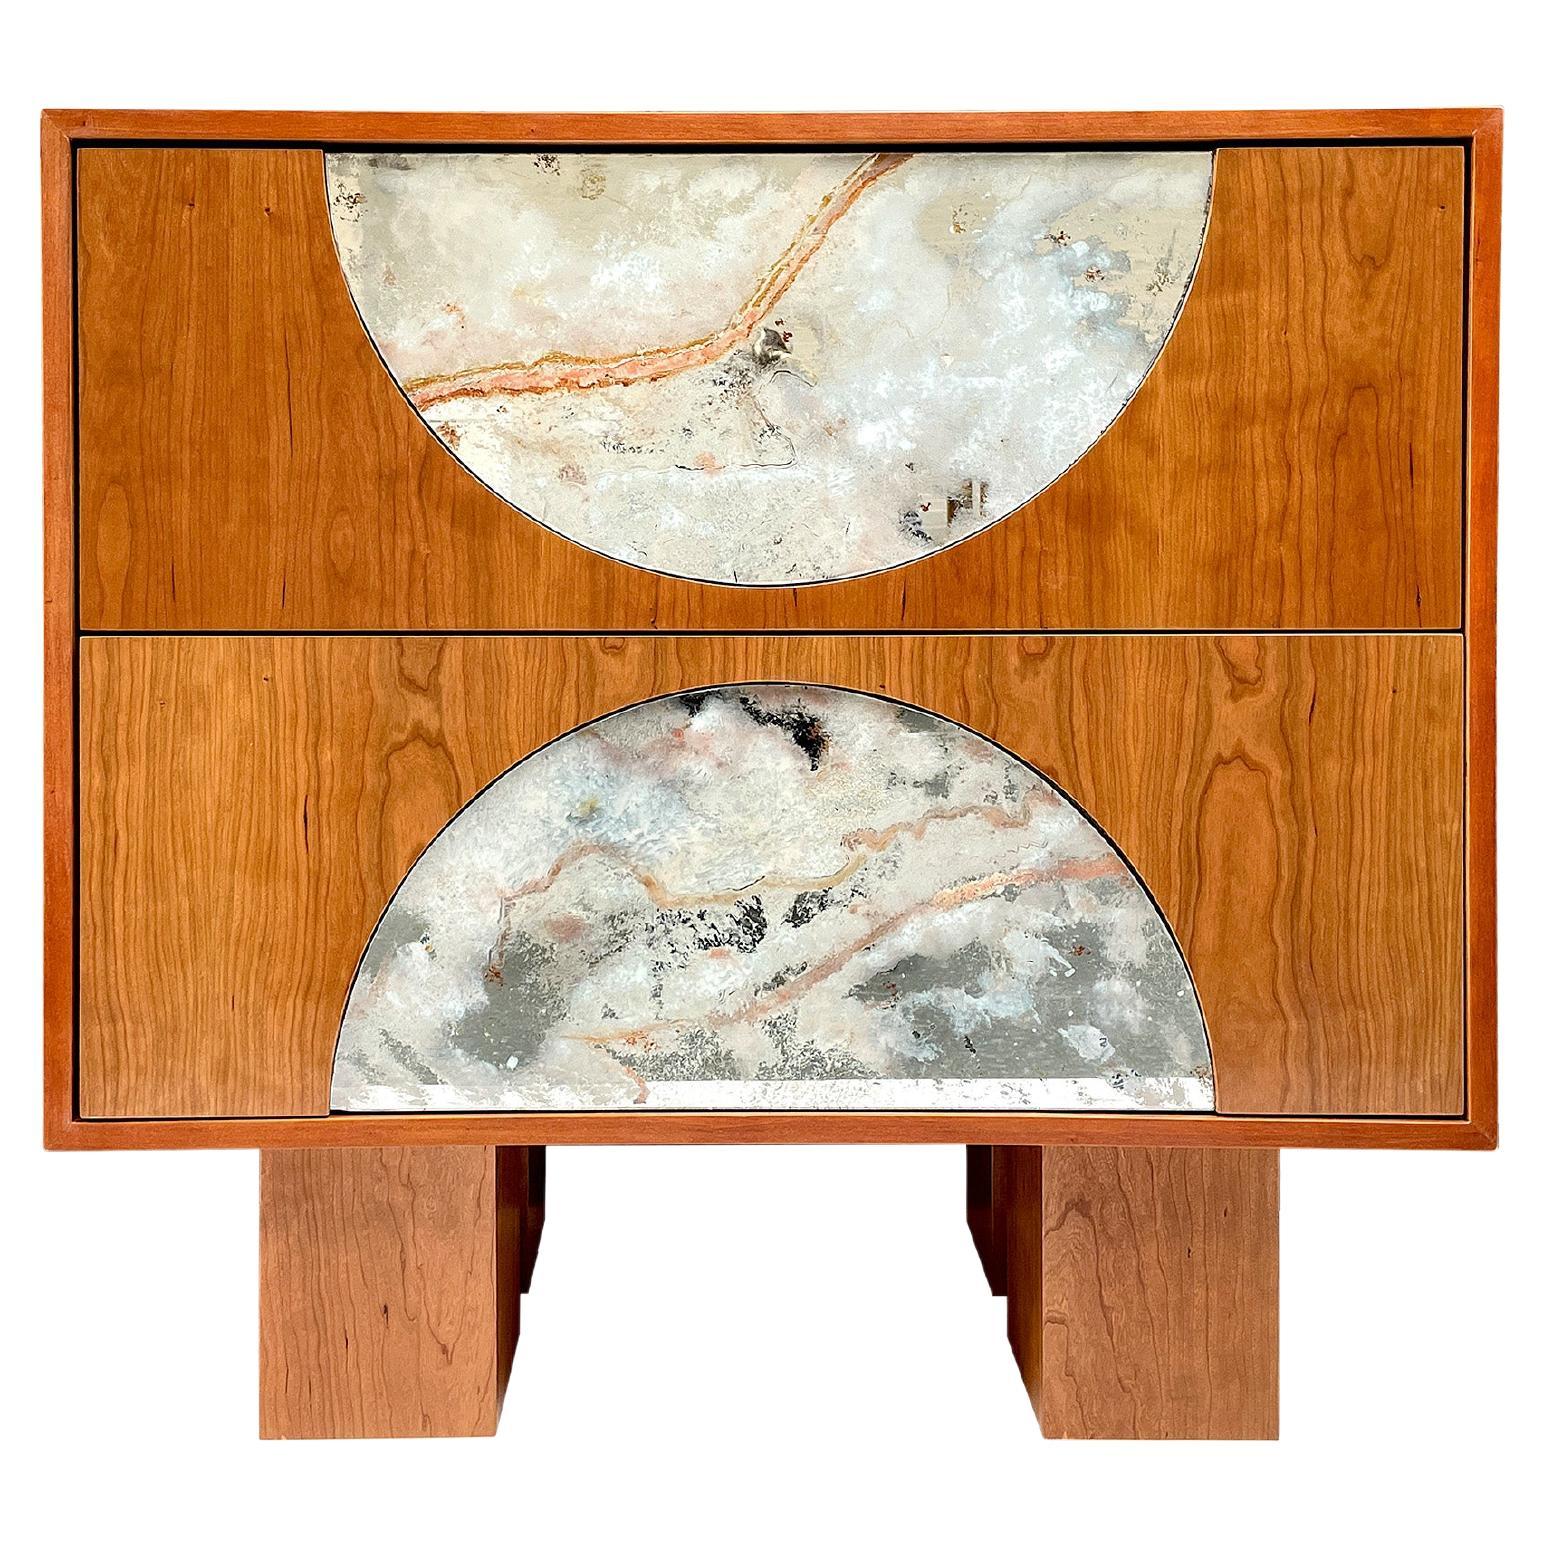 Modern 2-Drawer Sideboard in Cherry Wood, Eglomize' Mirror by Ercole Home For Sale